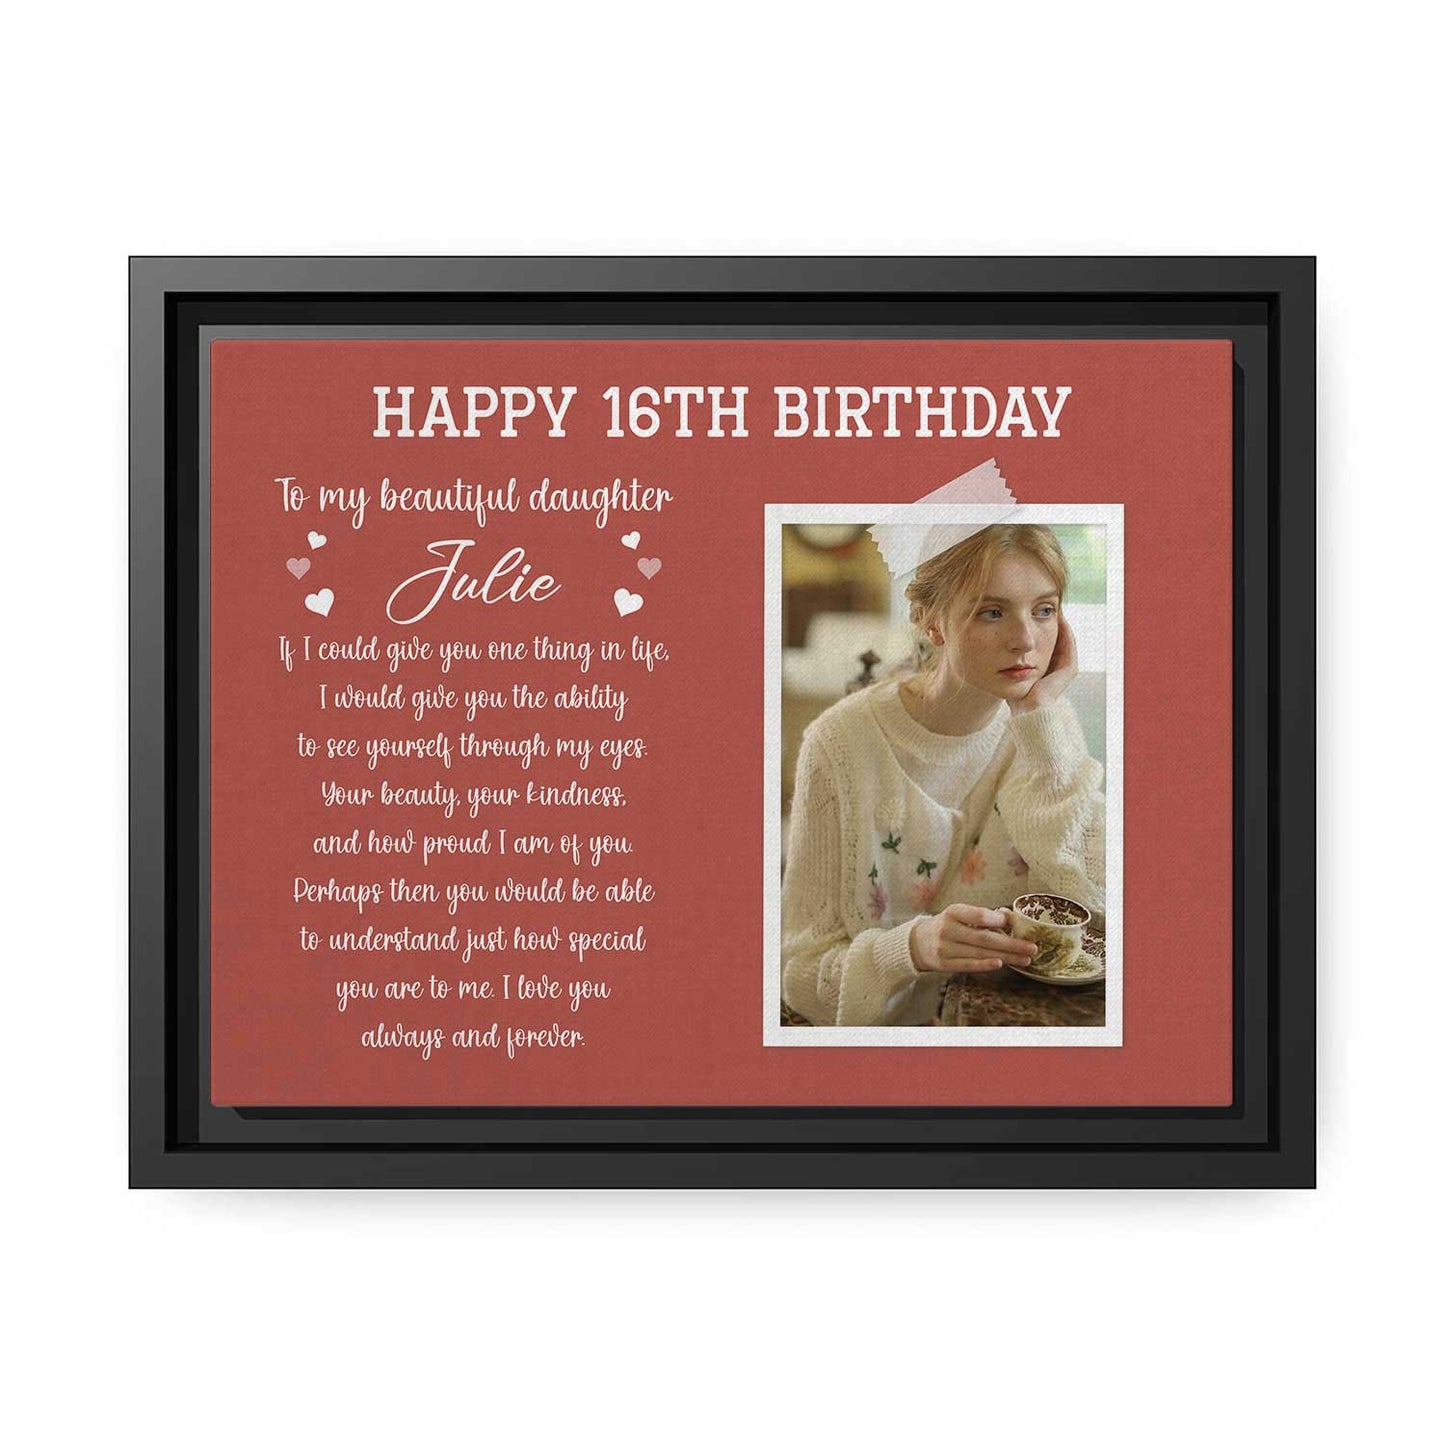 Happy 16th Birthday - Personalized 16th Birthday gift For Daughter - Custom Canvas Print - MyMindfulGifts